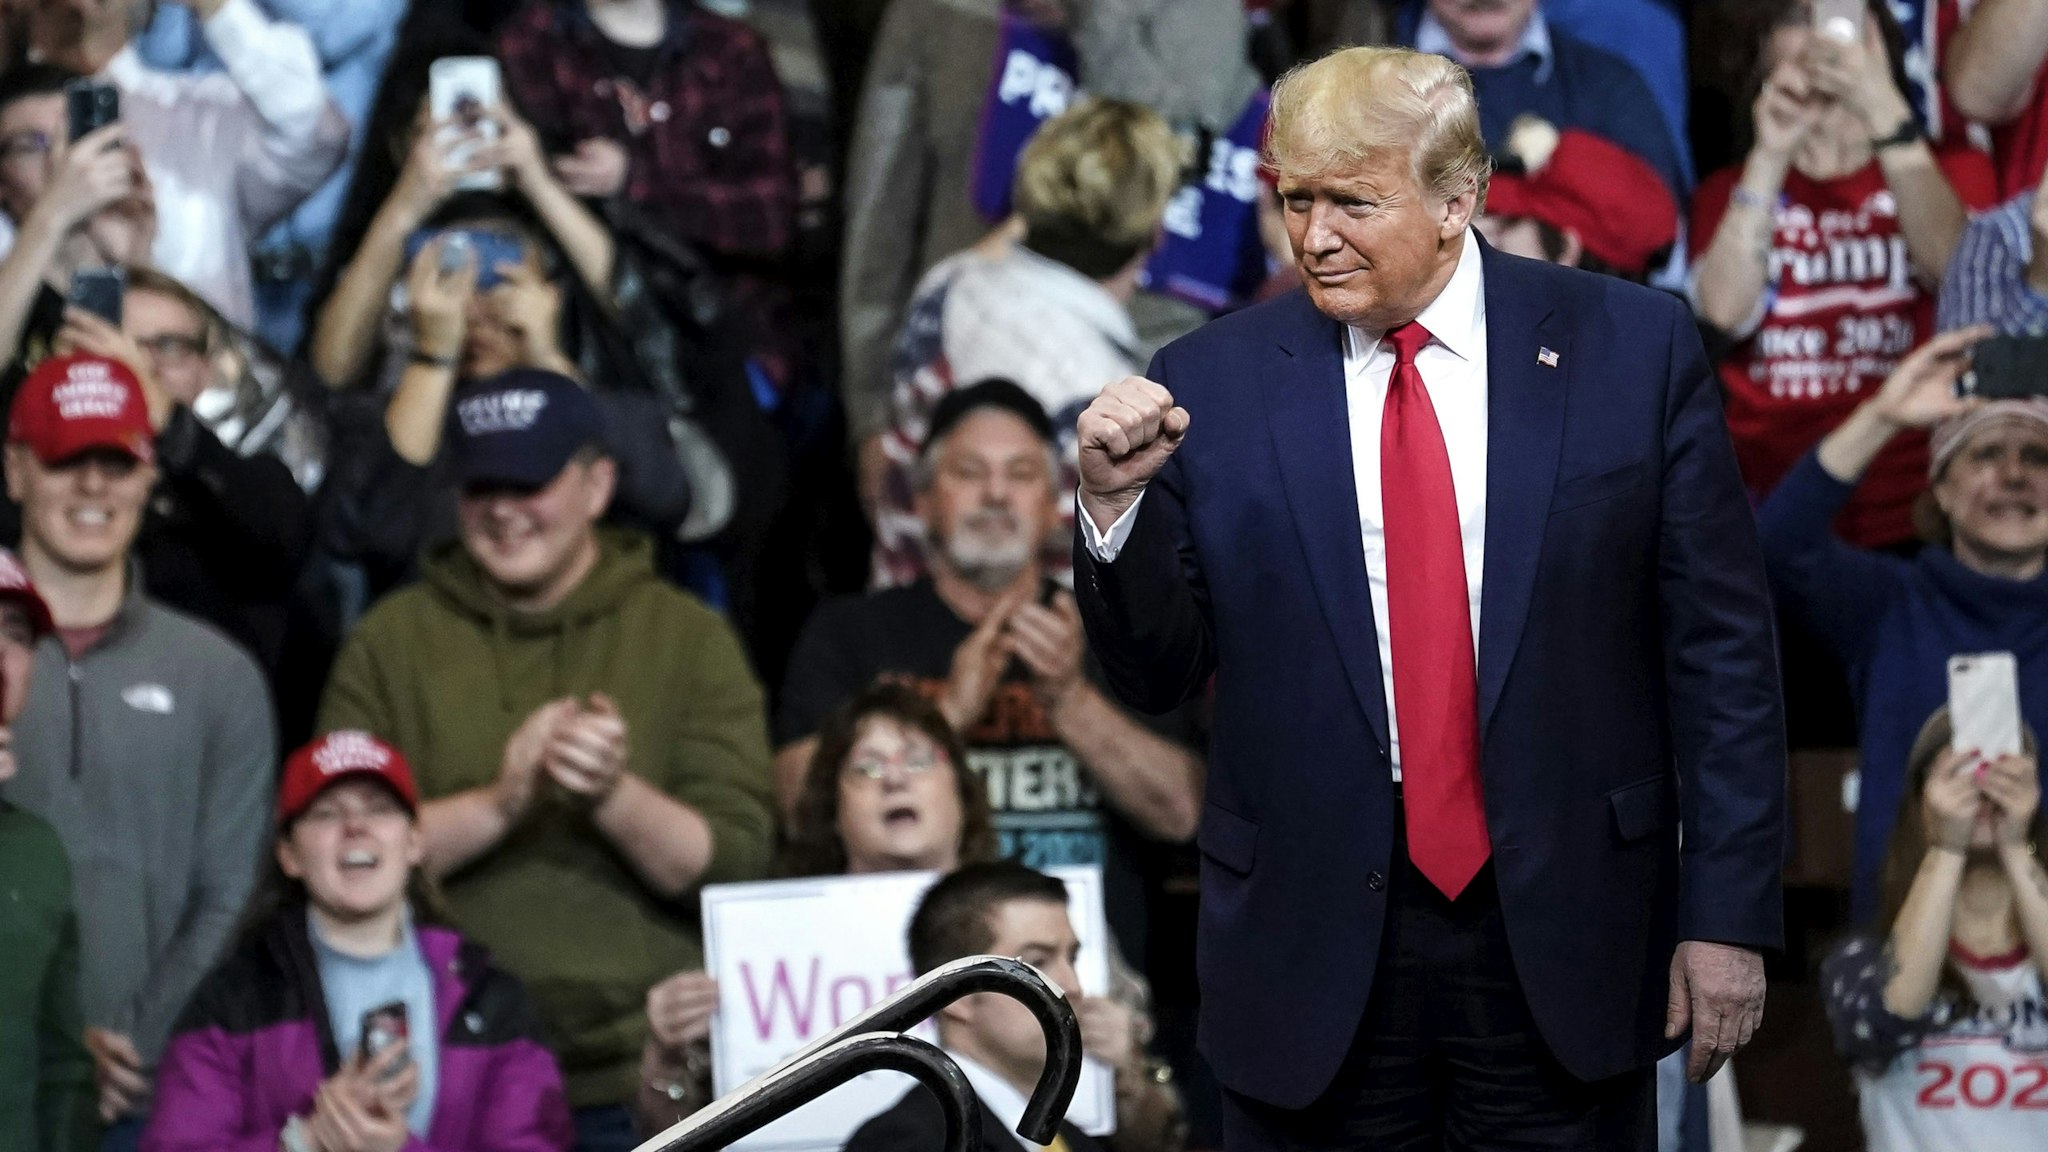 MANCHESTER, NH - FEBRUARY 10: U.S. President Donald Trump arrives for a "Keep America Great" rally at Southern New Hampshire University Arena on February 10, 2020 in Manchester, New Hampshire. New Hampshire will hold its first in the national primary on Tuesday.